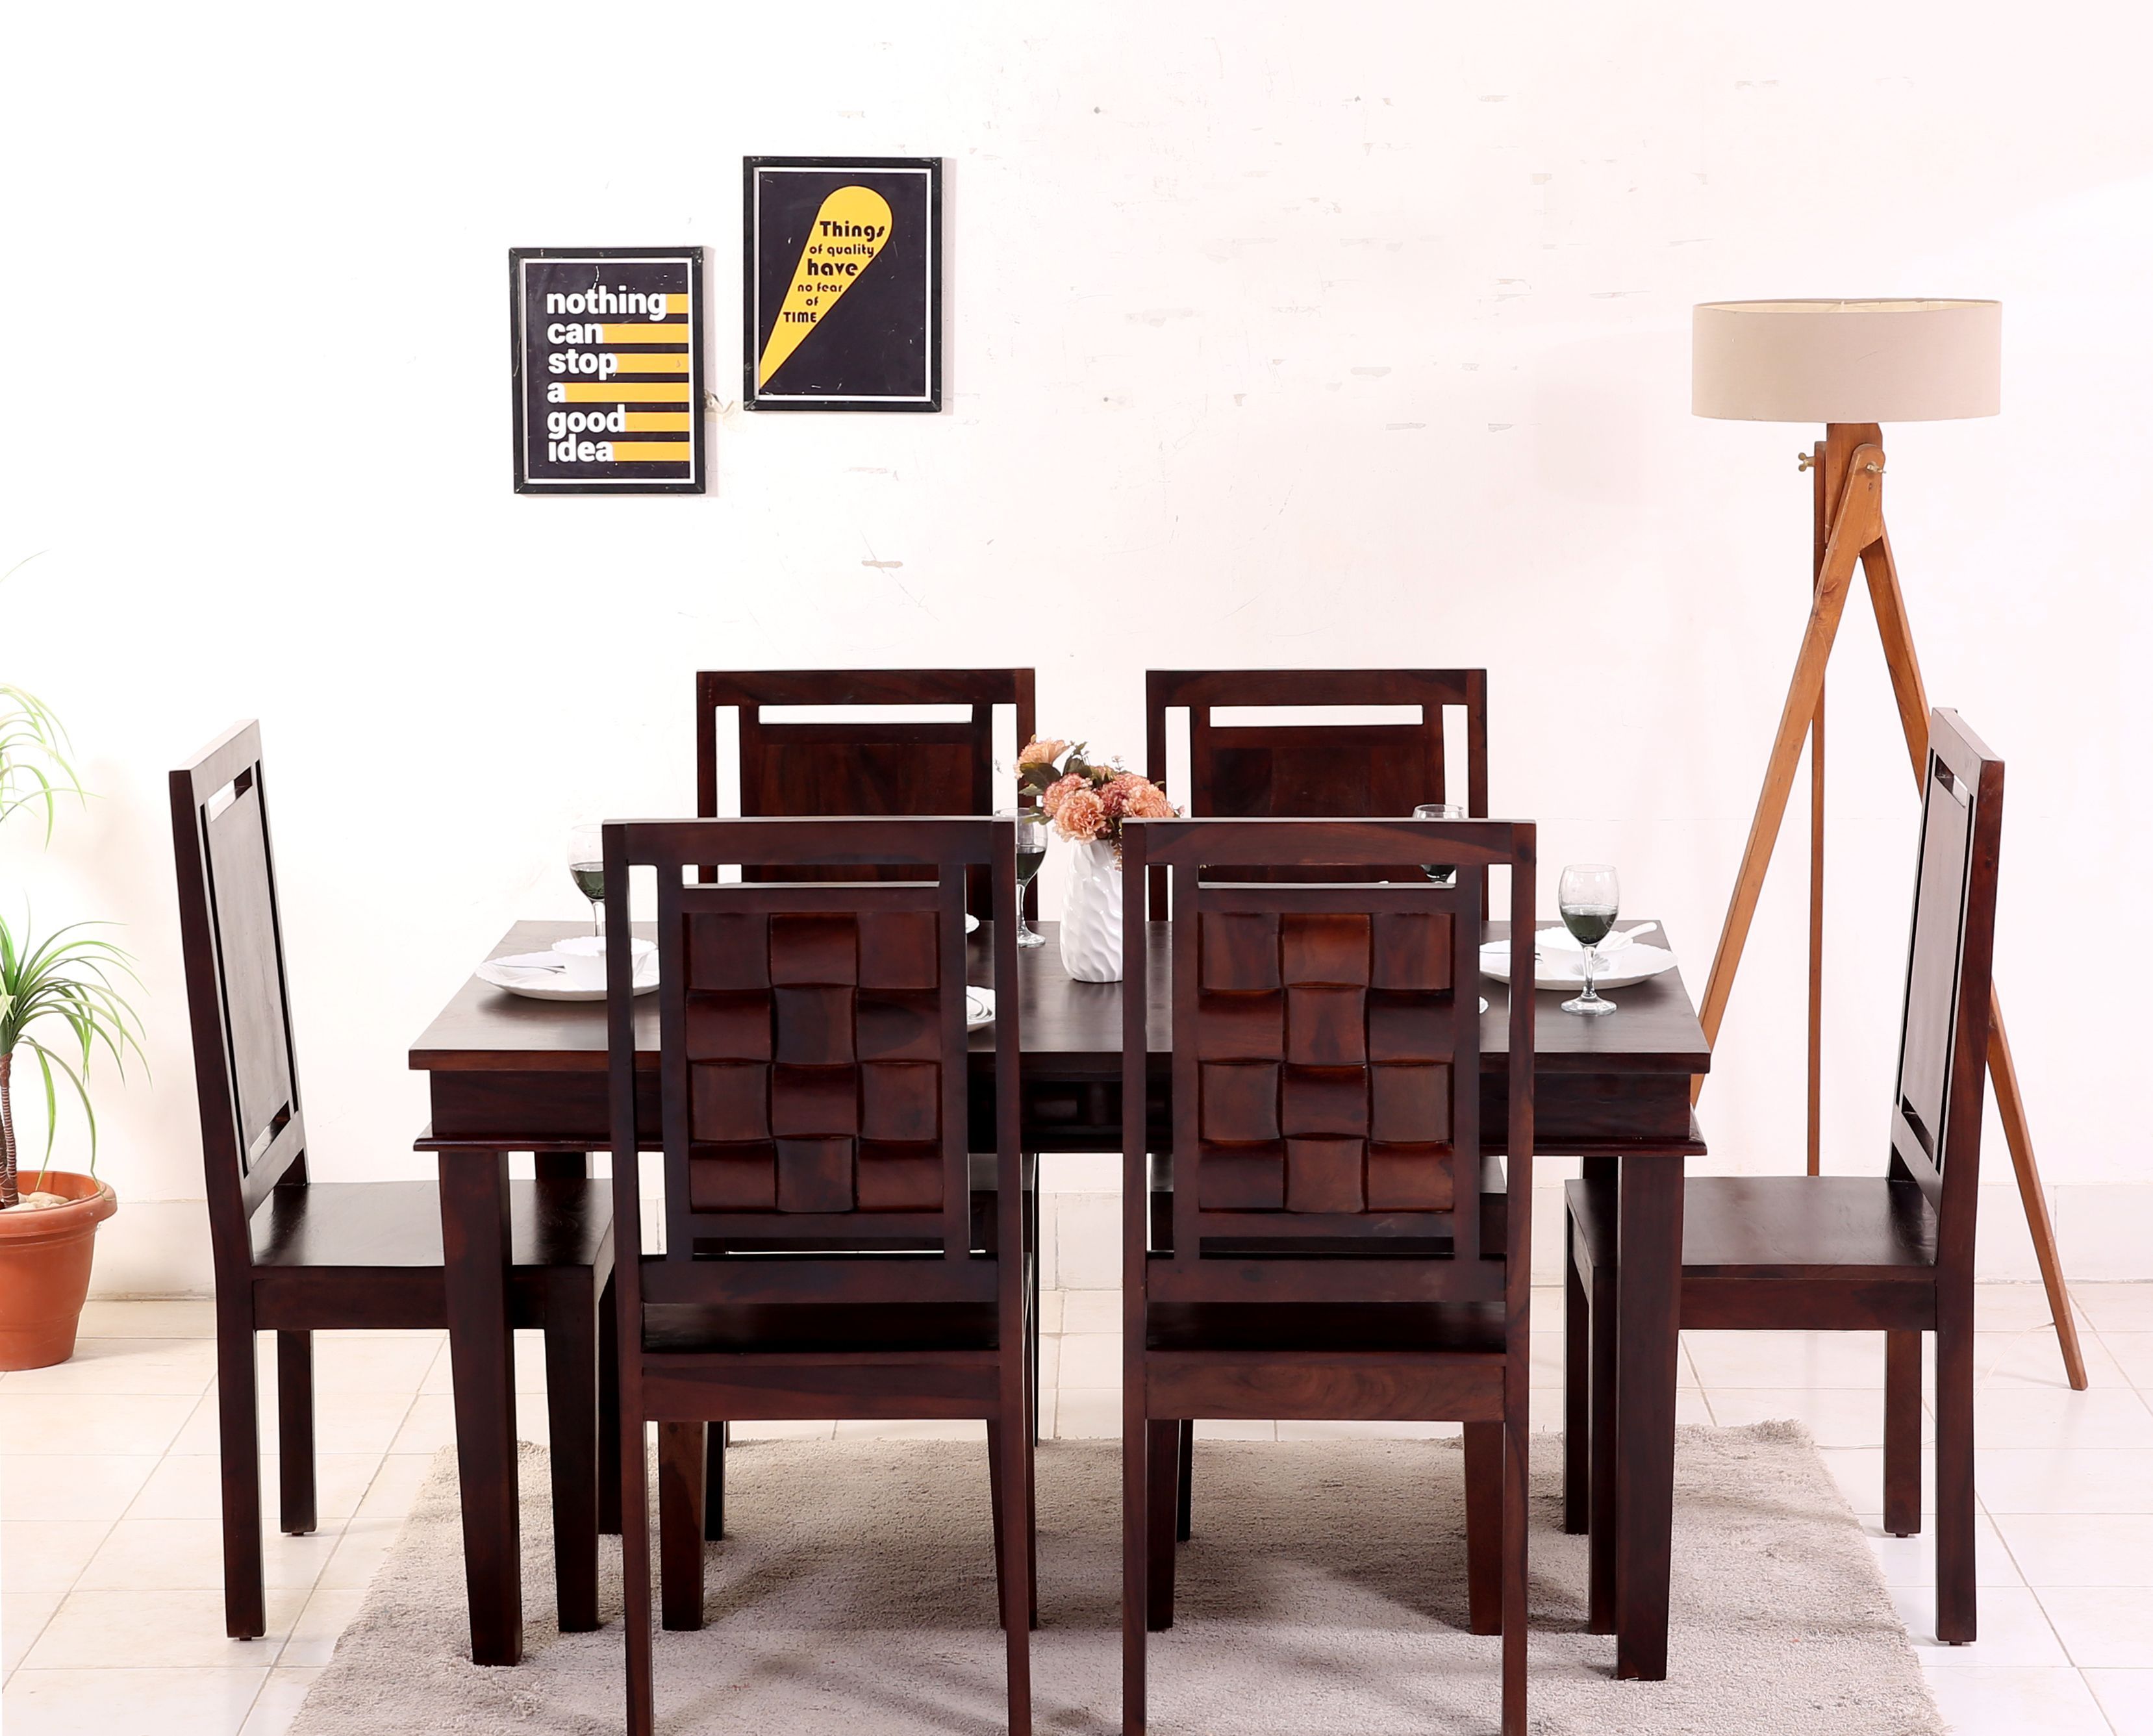 Give A Simple And Royal Look To Your Dining Space With The With Best And Newest Baxton Studio Keitaro 5 Piece Dining Sets (View 7 of 20)